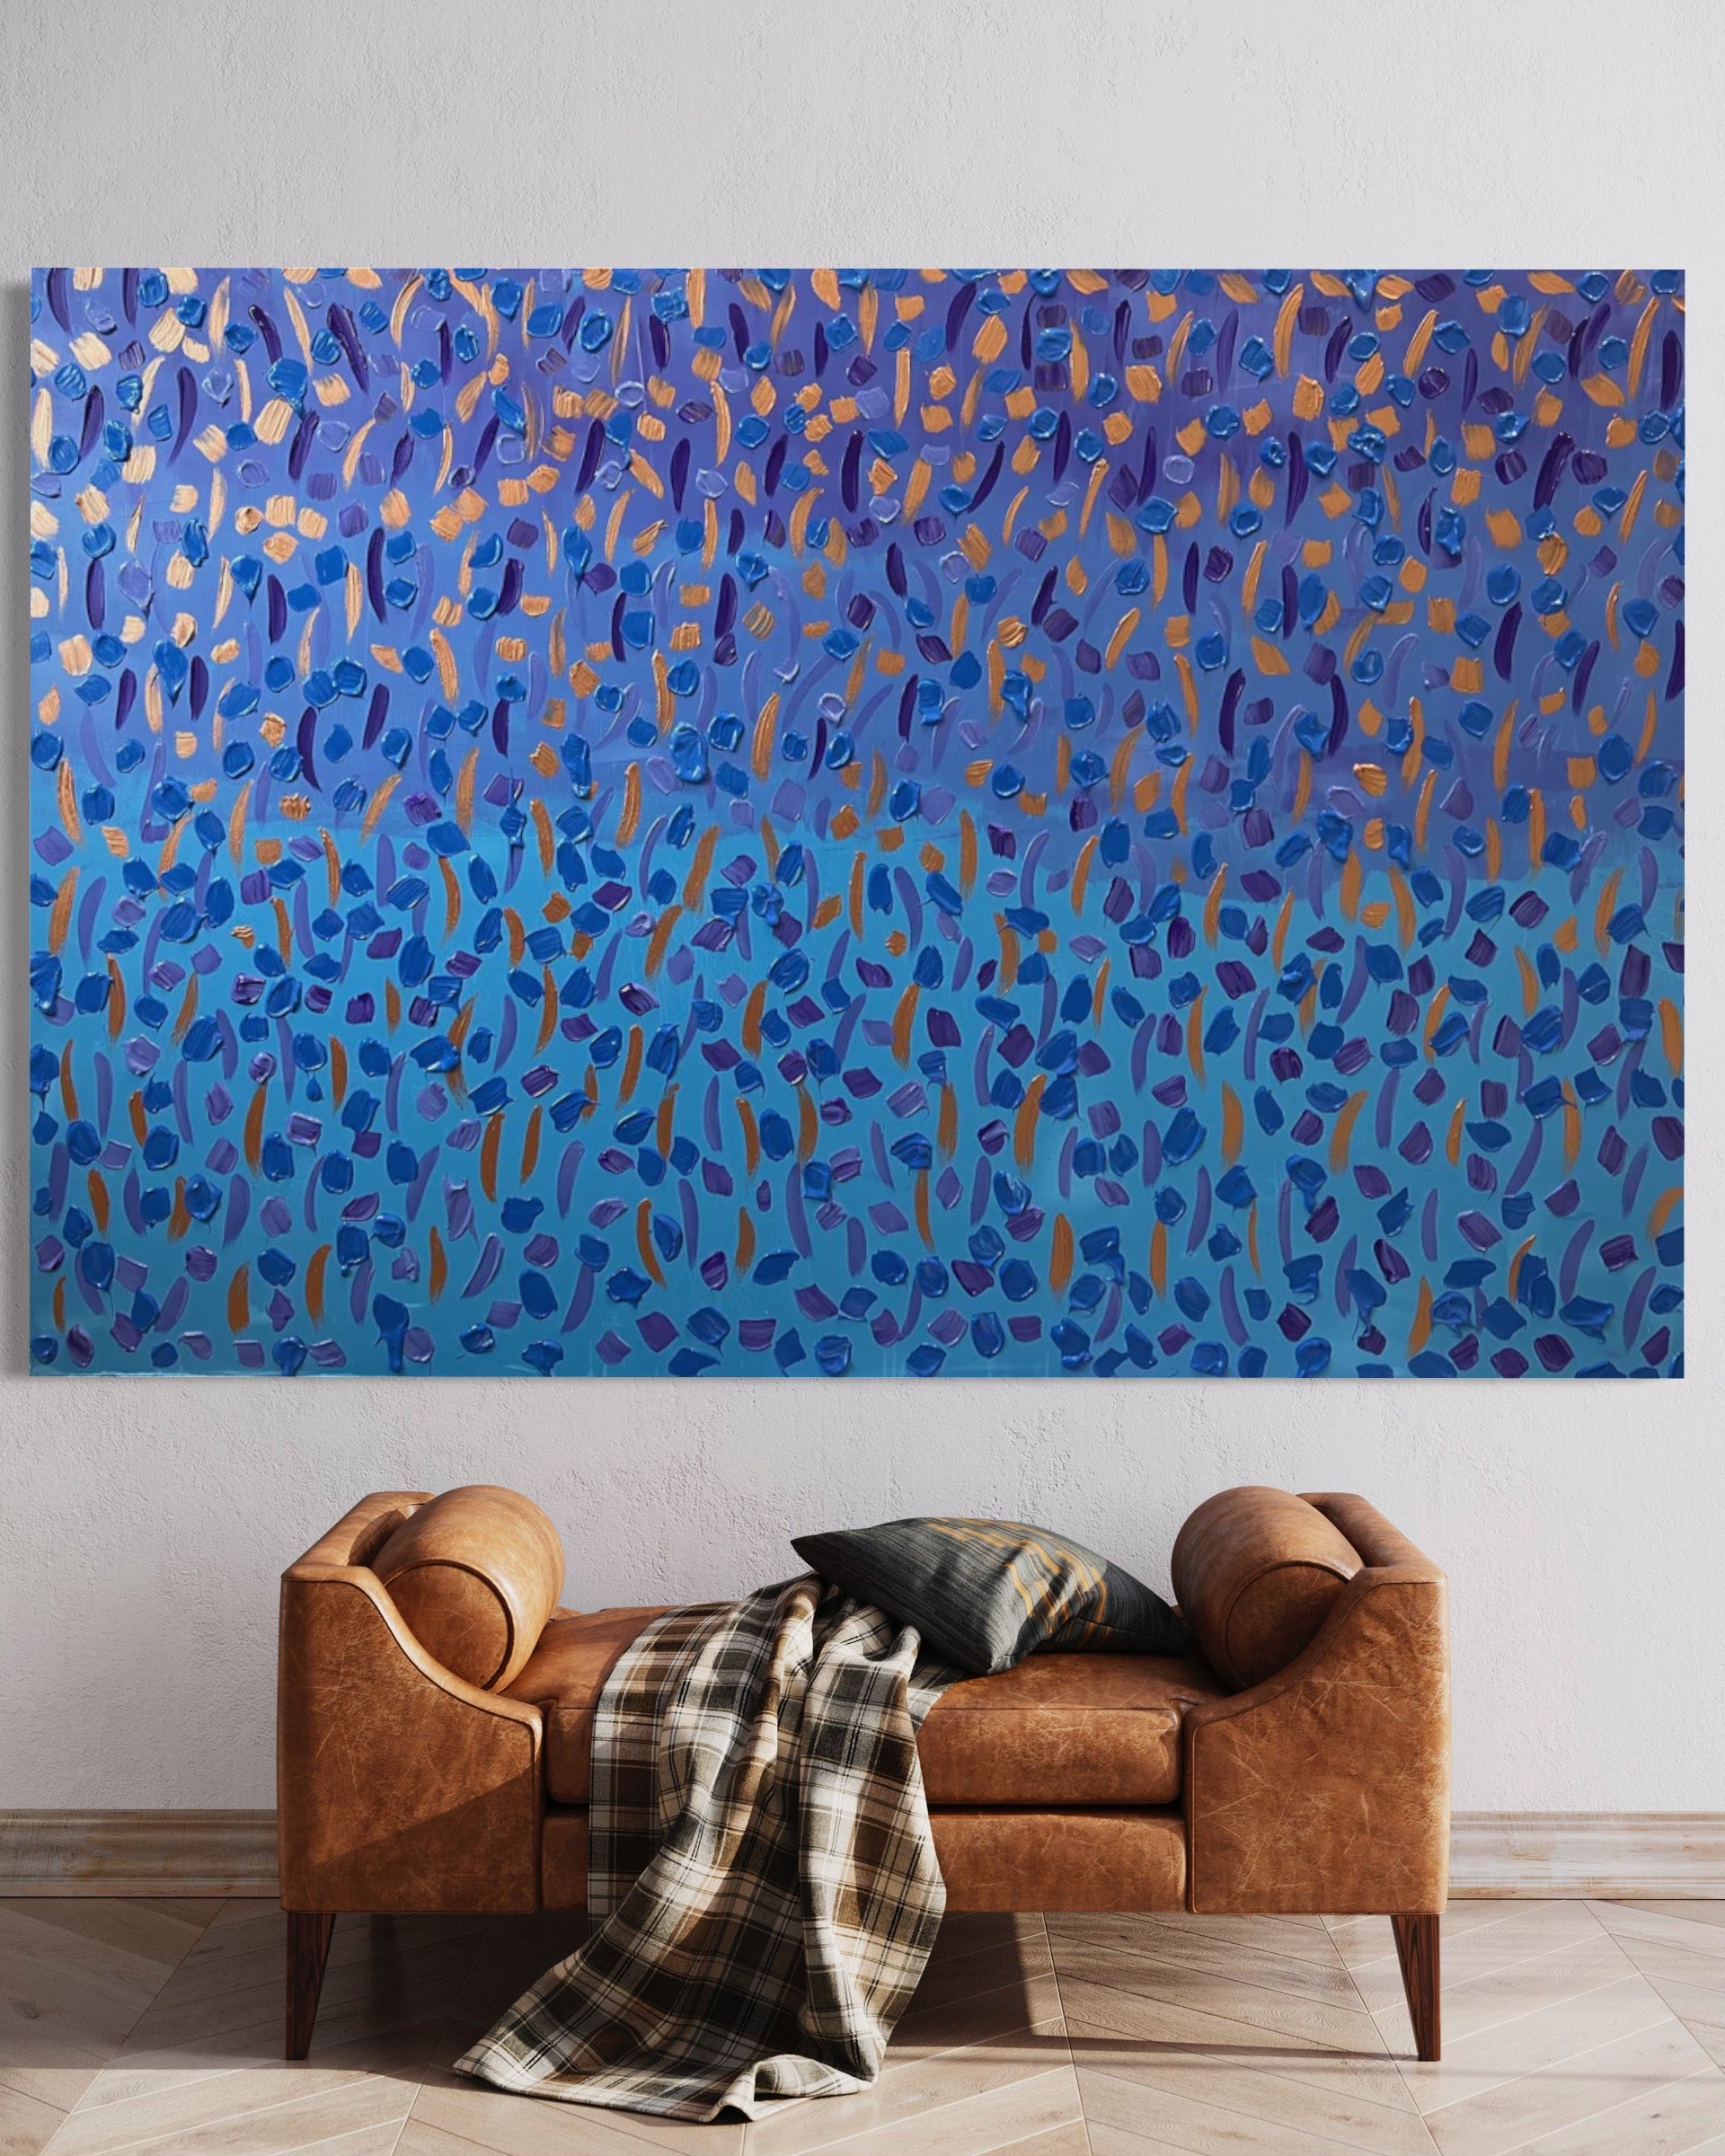 Fall 121.8 cm x 182.8 cm Baby Blue Textured Abstract Painting by Joanne Daniel